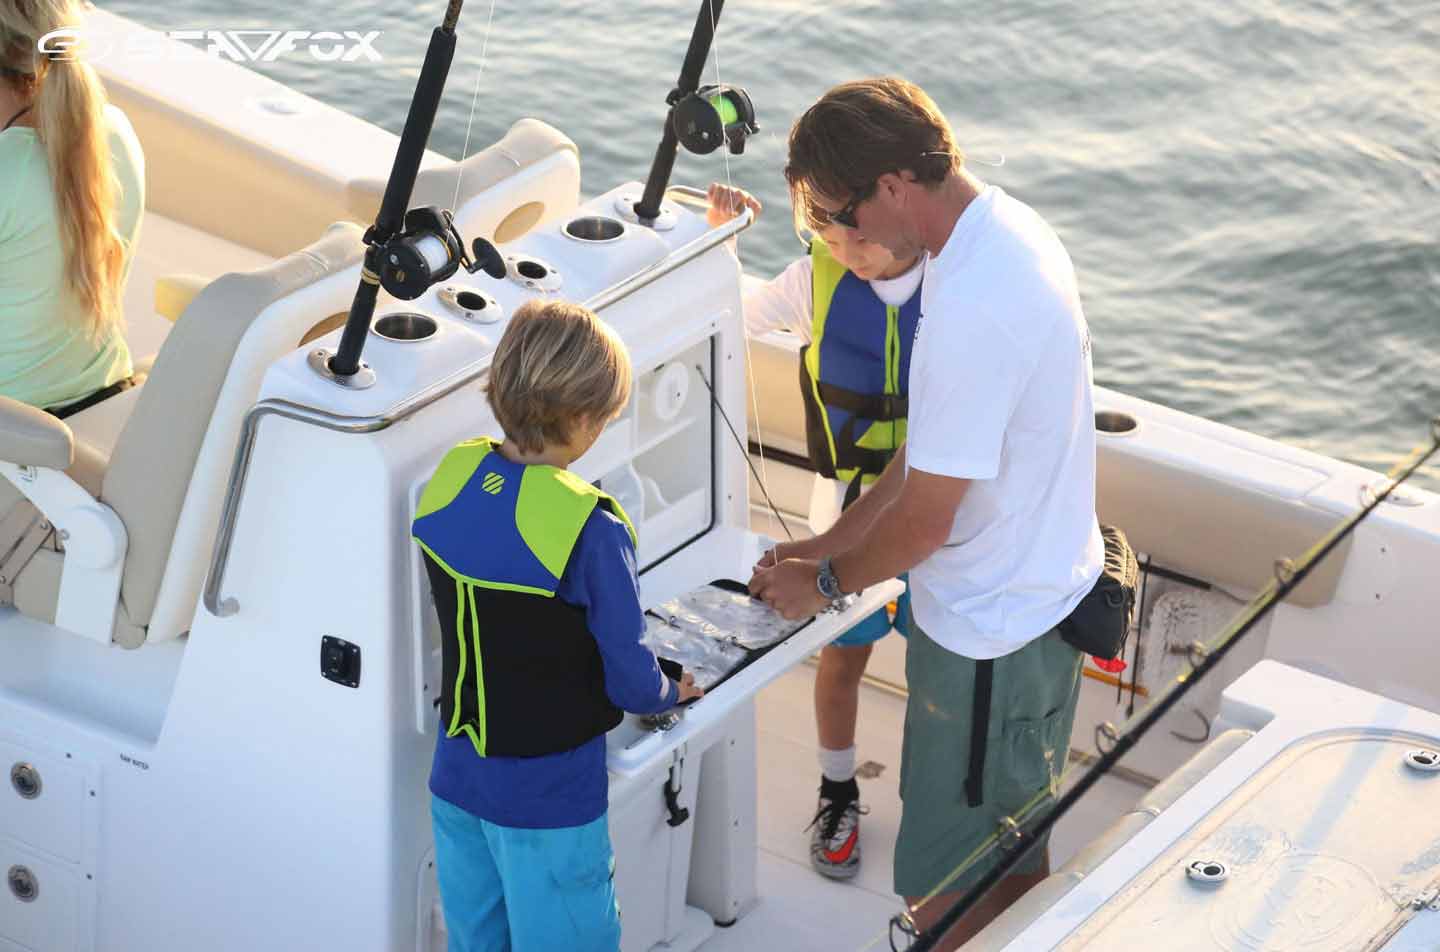 Father and son fishing on a Sea Fox Commander.